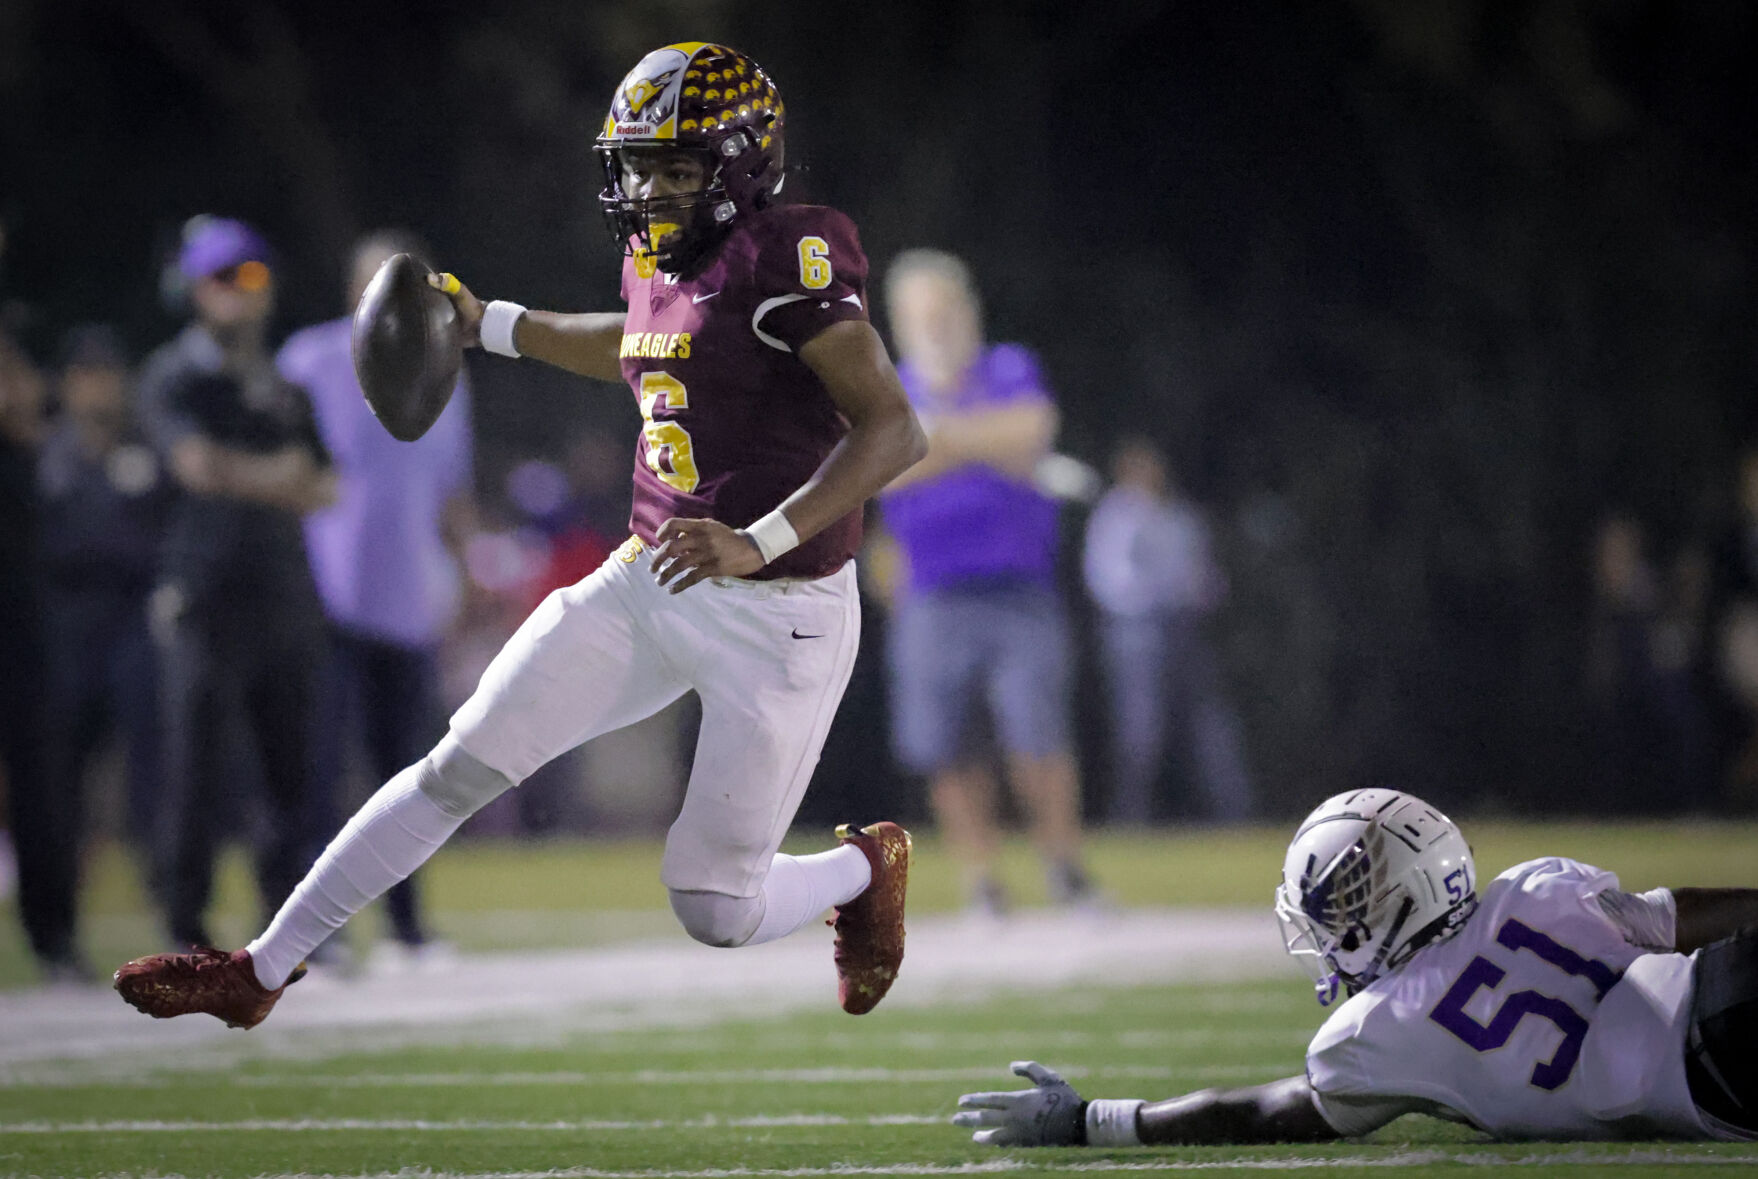 McDonogh 35 Dominates in a 28-0 Win Over L.B. Landry in Division II Select Playoffs